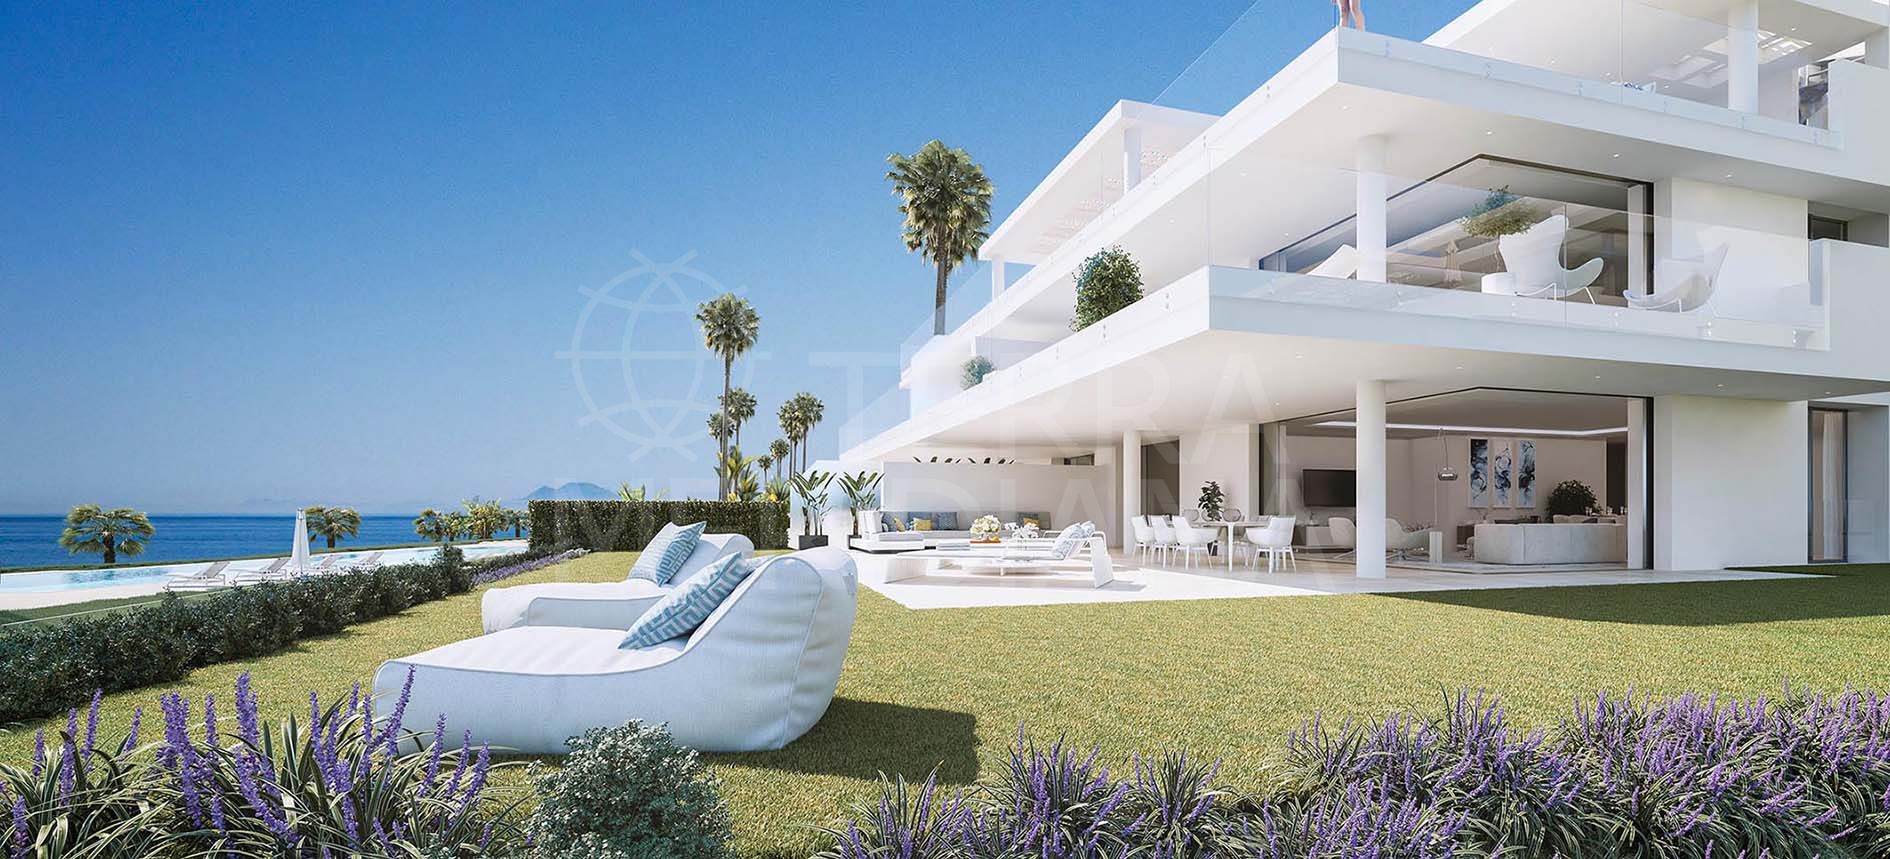 EMARE, Estepona - Superb new high quality beach-side residences on the New Golden Mile with a contemporary design